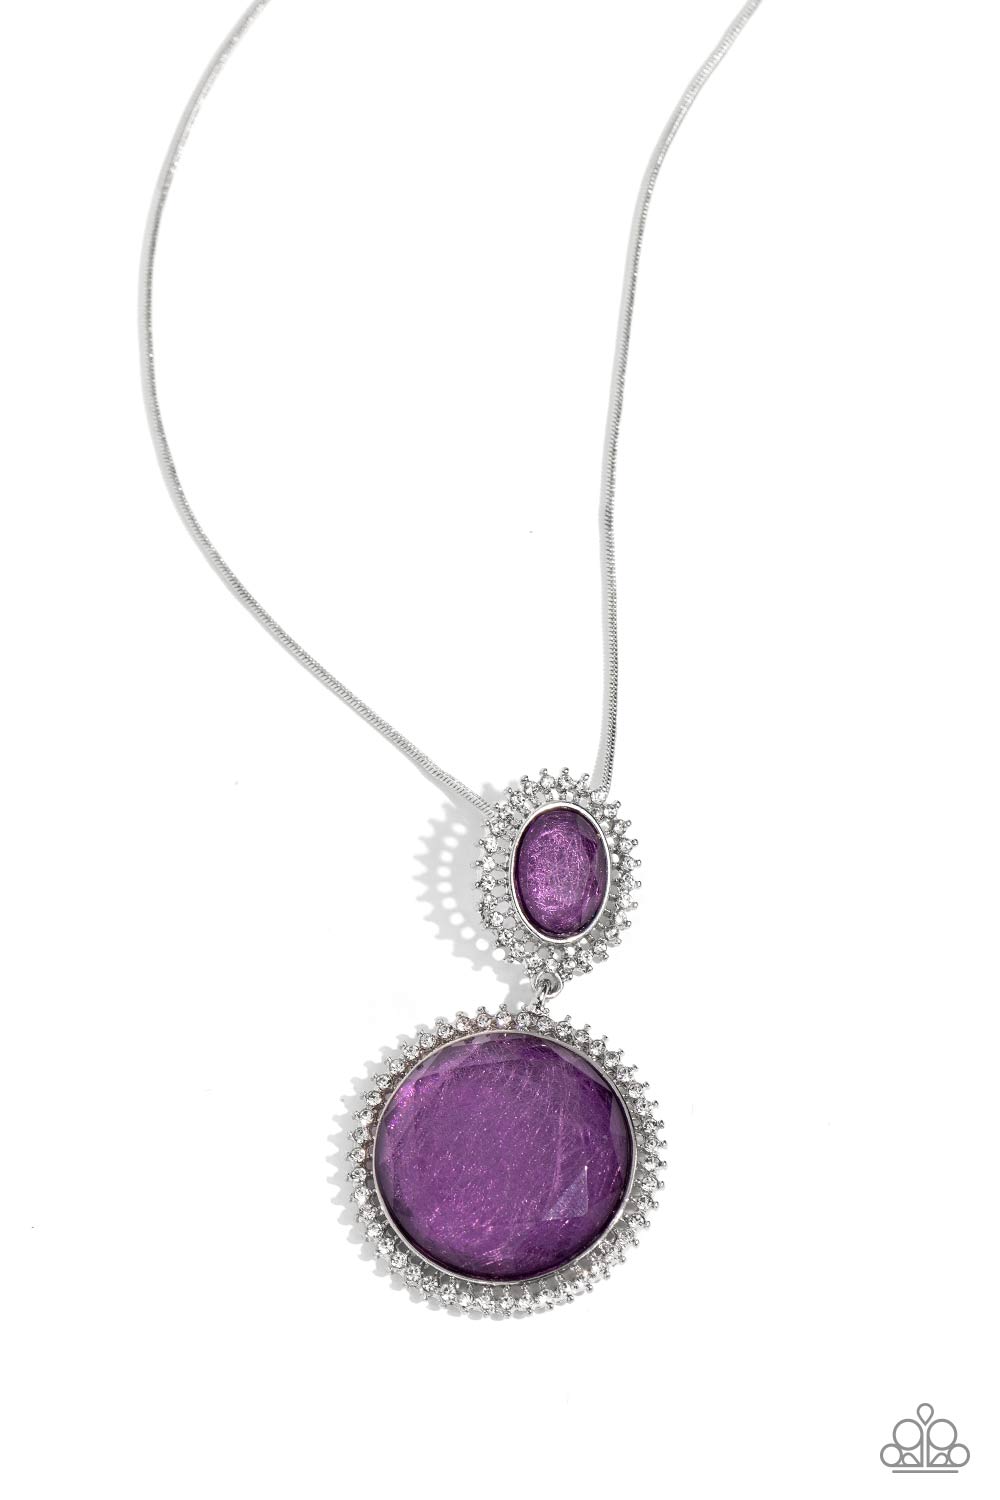 Paparazzi Accessories - Castle Cadenza - Purple Neckencasfeaturing a scratched motif, a large purple gem is encased in a border of rhinestone-dusted silver, as it's suspended from a smaller version of the same design but in an oval shape. The stacked pendant then slides along an elongated silver snake chain for a regal finish. Features an adjustable clasp closure.  Sold as one individual necklace. Includes one pair of matching earrings.